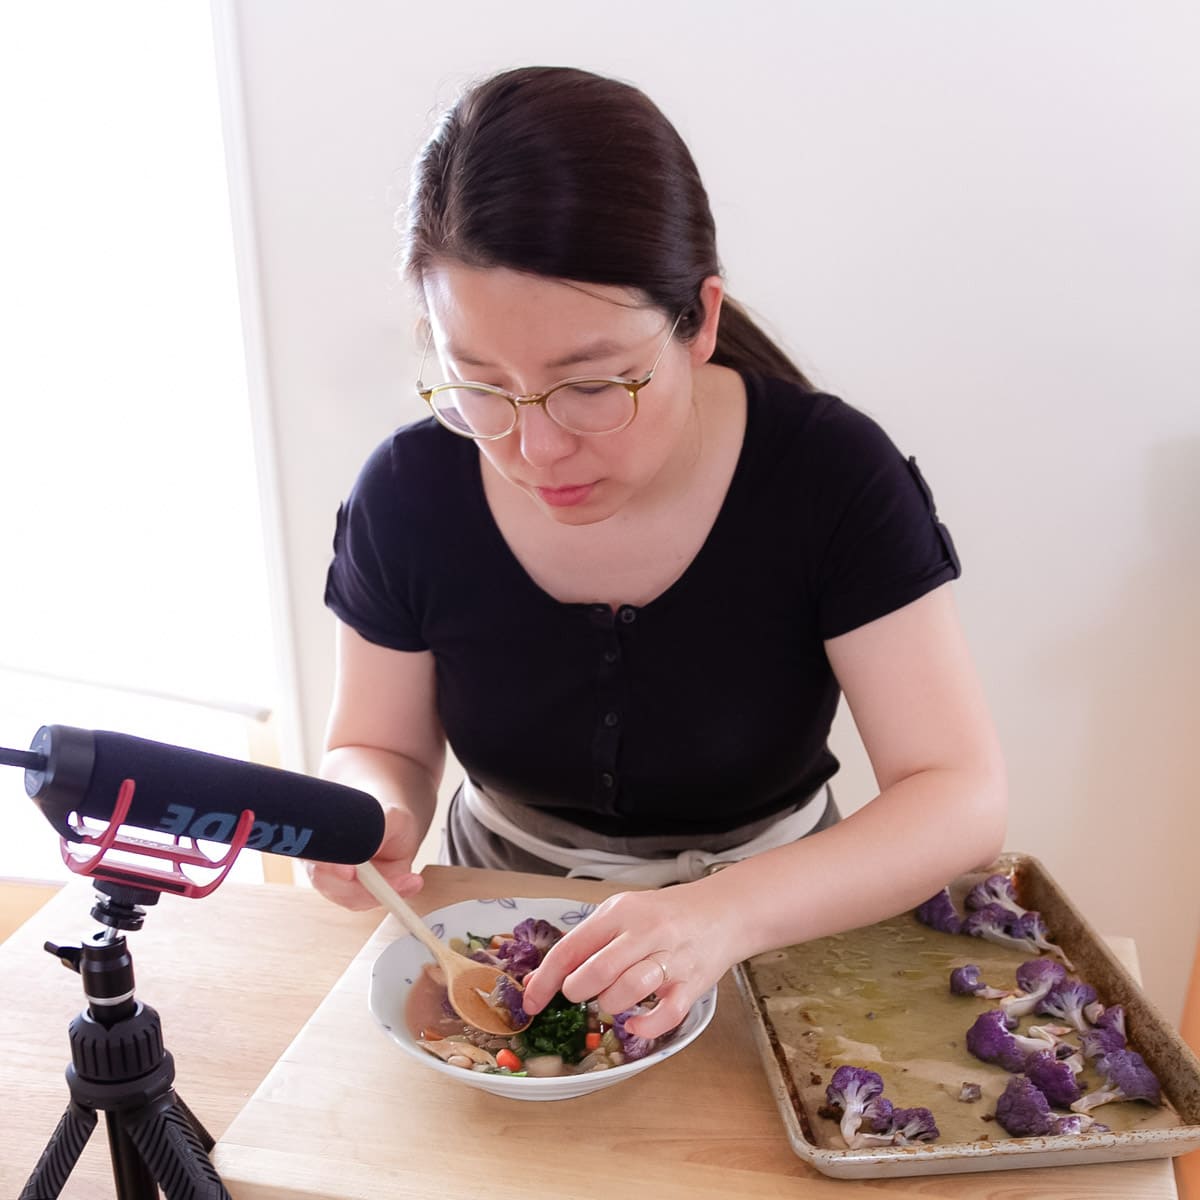 Cindy food styling a bowl of colorful chicken and vegetable soup with a tray of purple cauliflower on the side and a Rode microphone in the front.